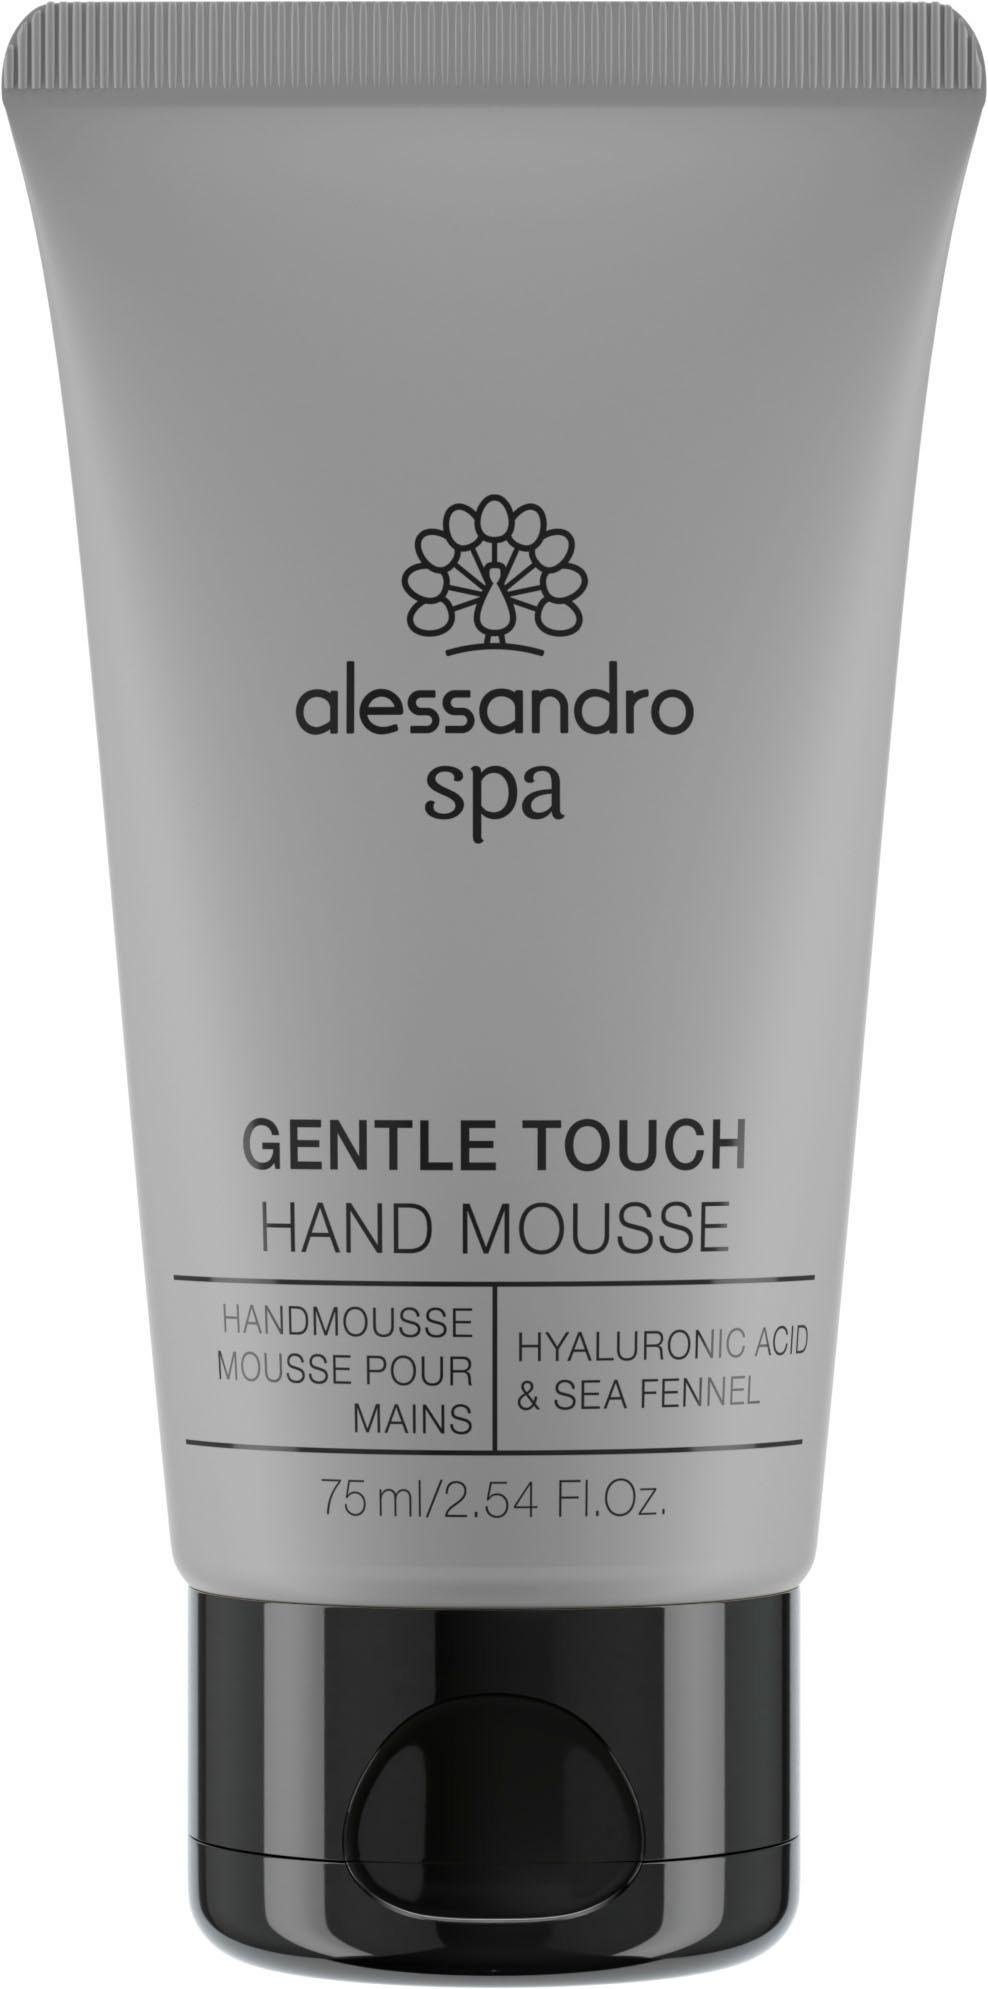 alessandro international Handmousse SPA GENTLE TOUCH